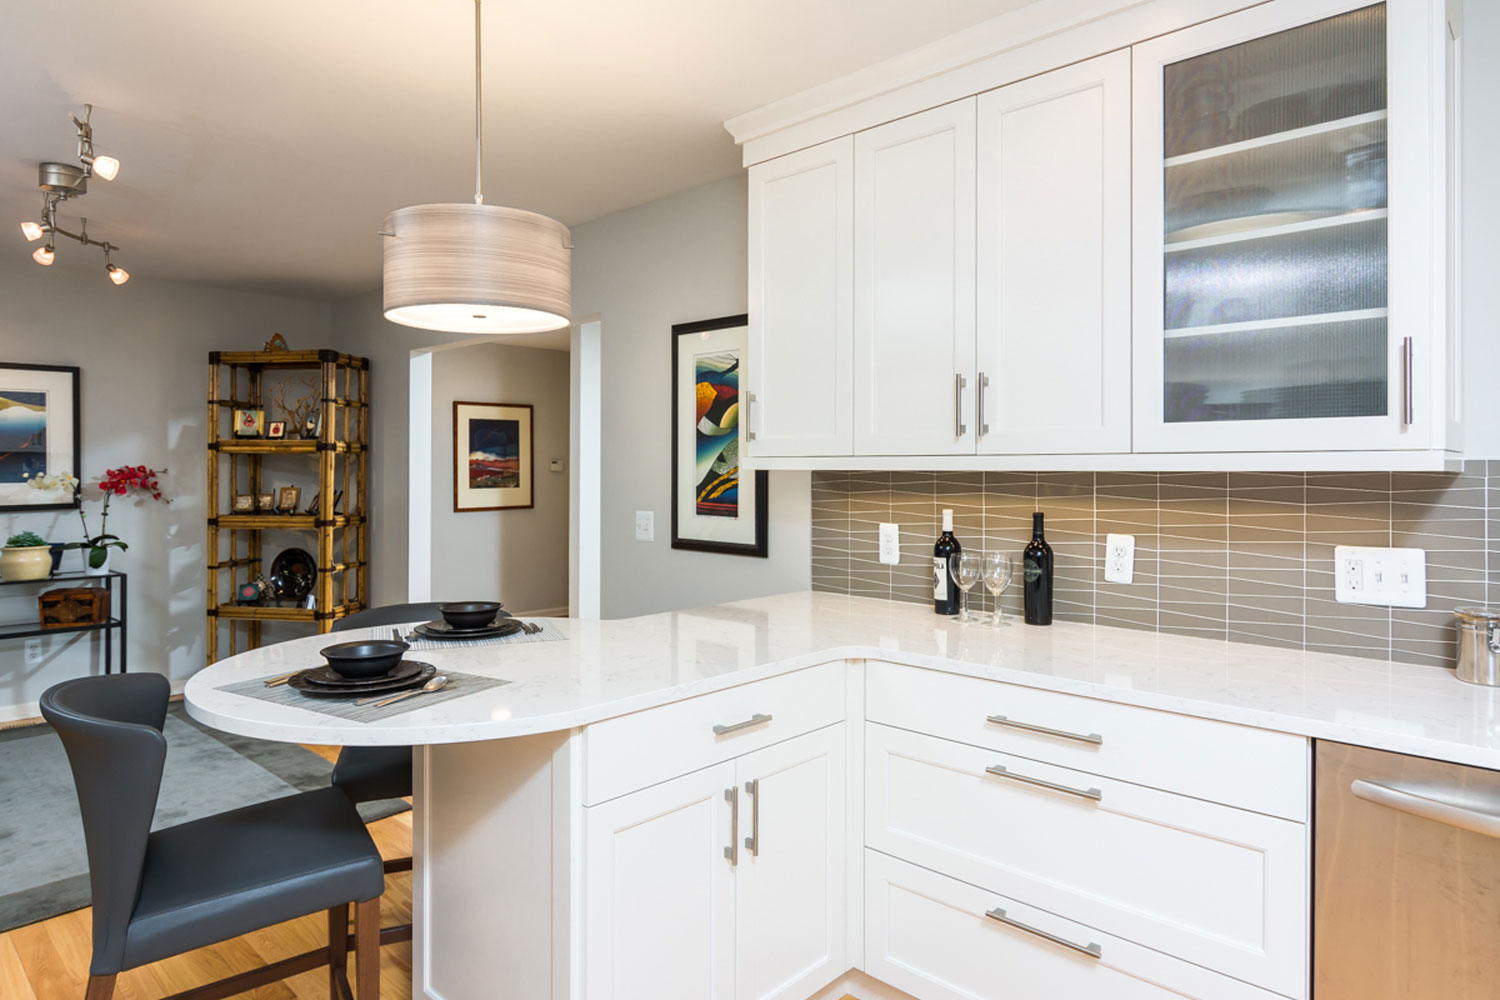 Kitchen Cabinet Construction, Learn Why the Cabinet Box Matters